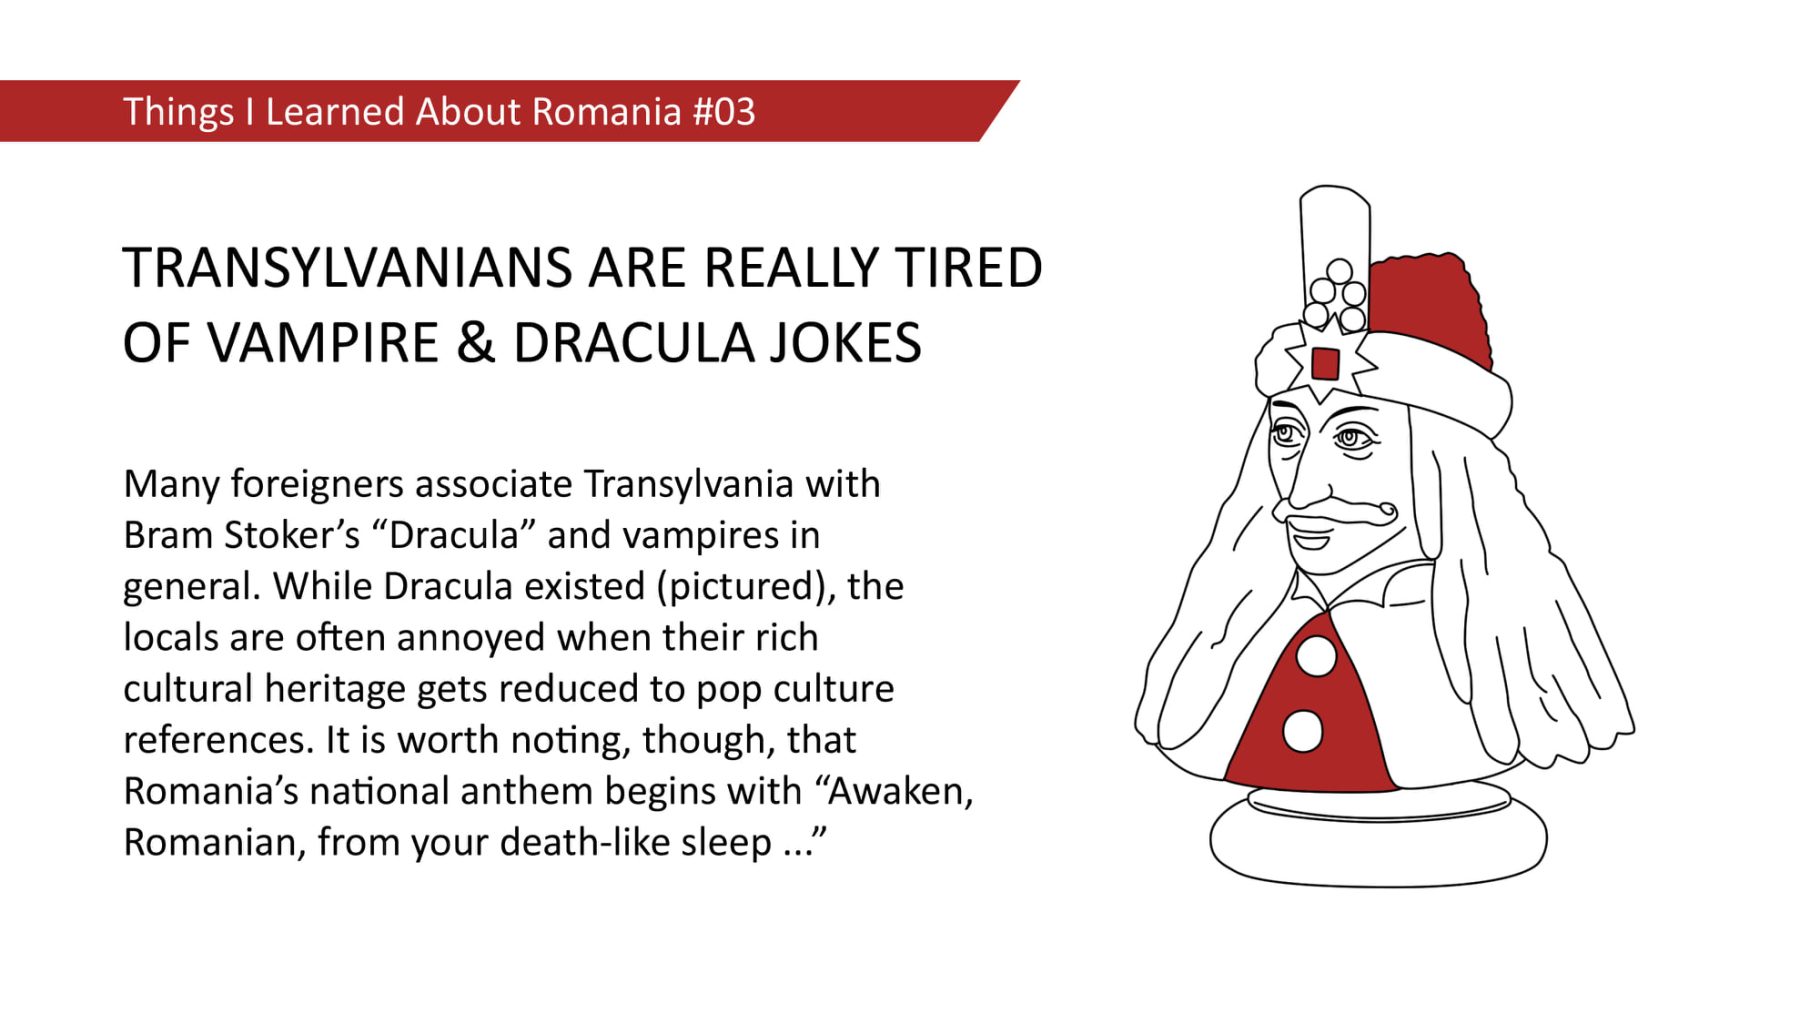 Many foreigners associate Transylvania with Bram Stoker's "Dracula" and vampires in general. While Dracula existed (pictured), the locals are often annoyed when their rich cultural heritage gets reduced to pop culture references. It is worth noting, though, that Romania's national anthem begins with "Awaken, Romanian, from your death-like sleep ..."